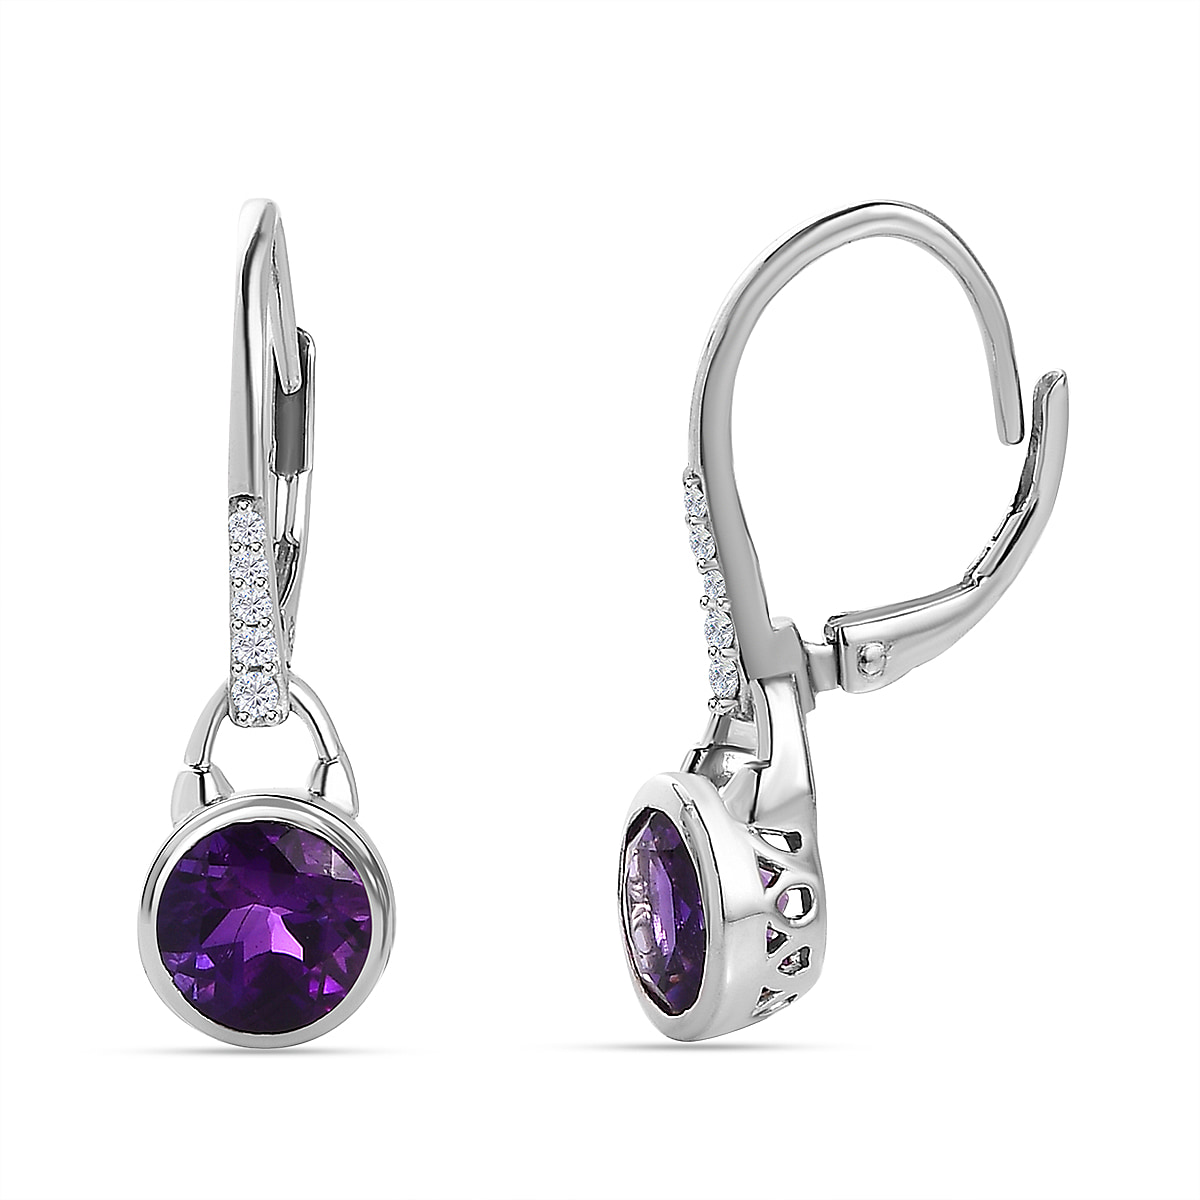 Moroccan Amethyst & Natural Zircon Earrings in Platinum Overlay Sterling Silver 2.64 Ct.